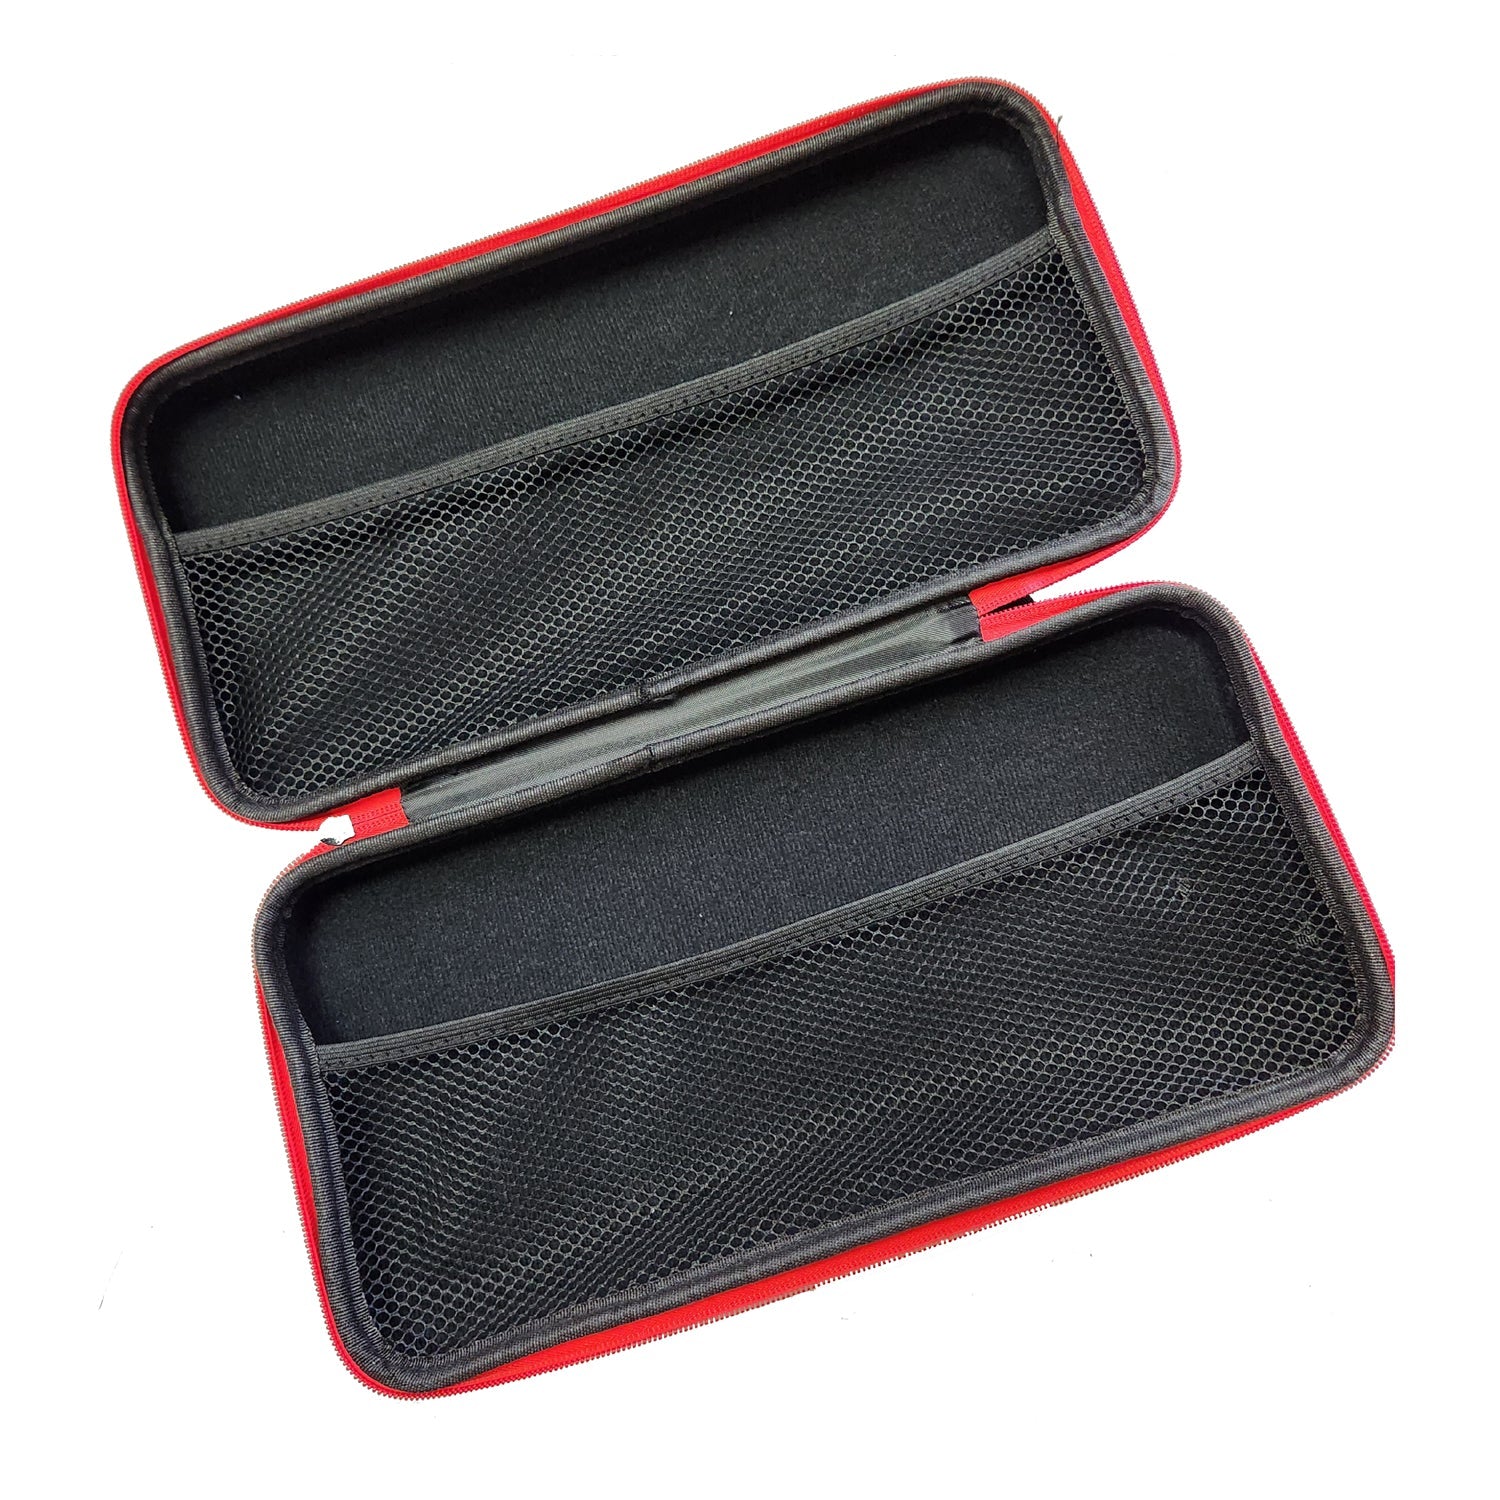 Compact Carry Case for 2x Wireless Microphones - Karaoke Home Entertainment